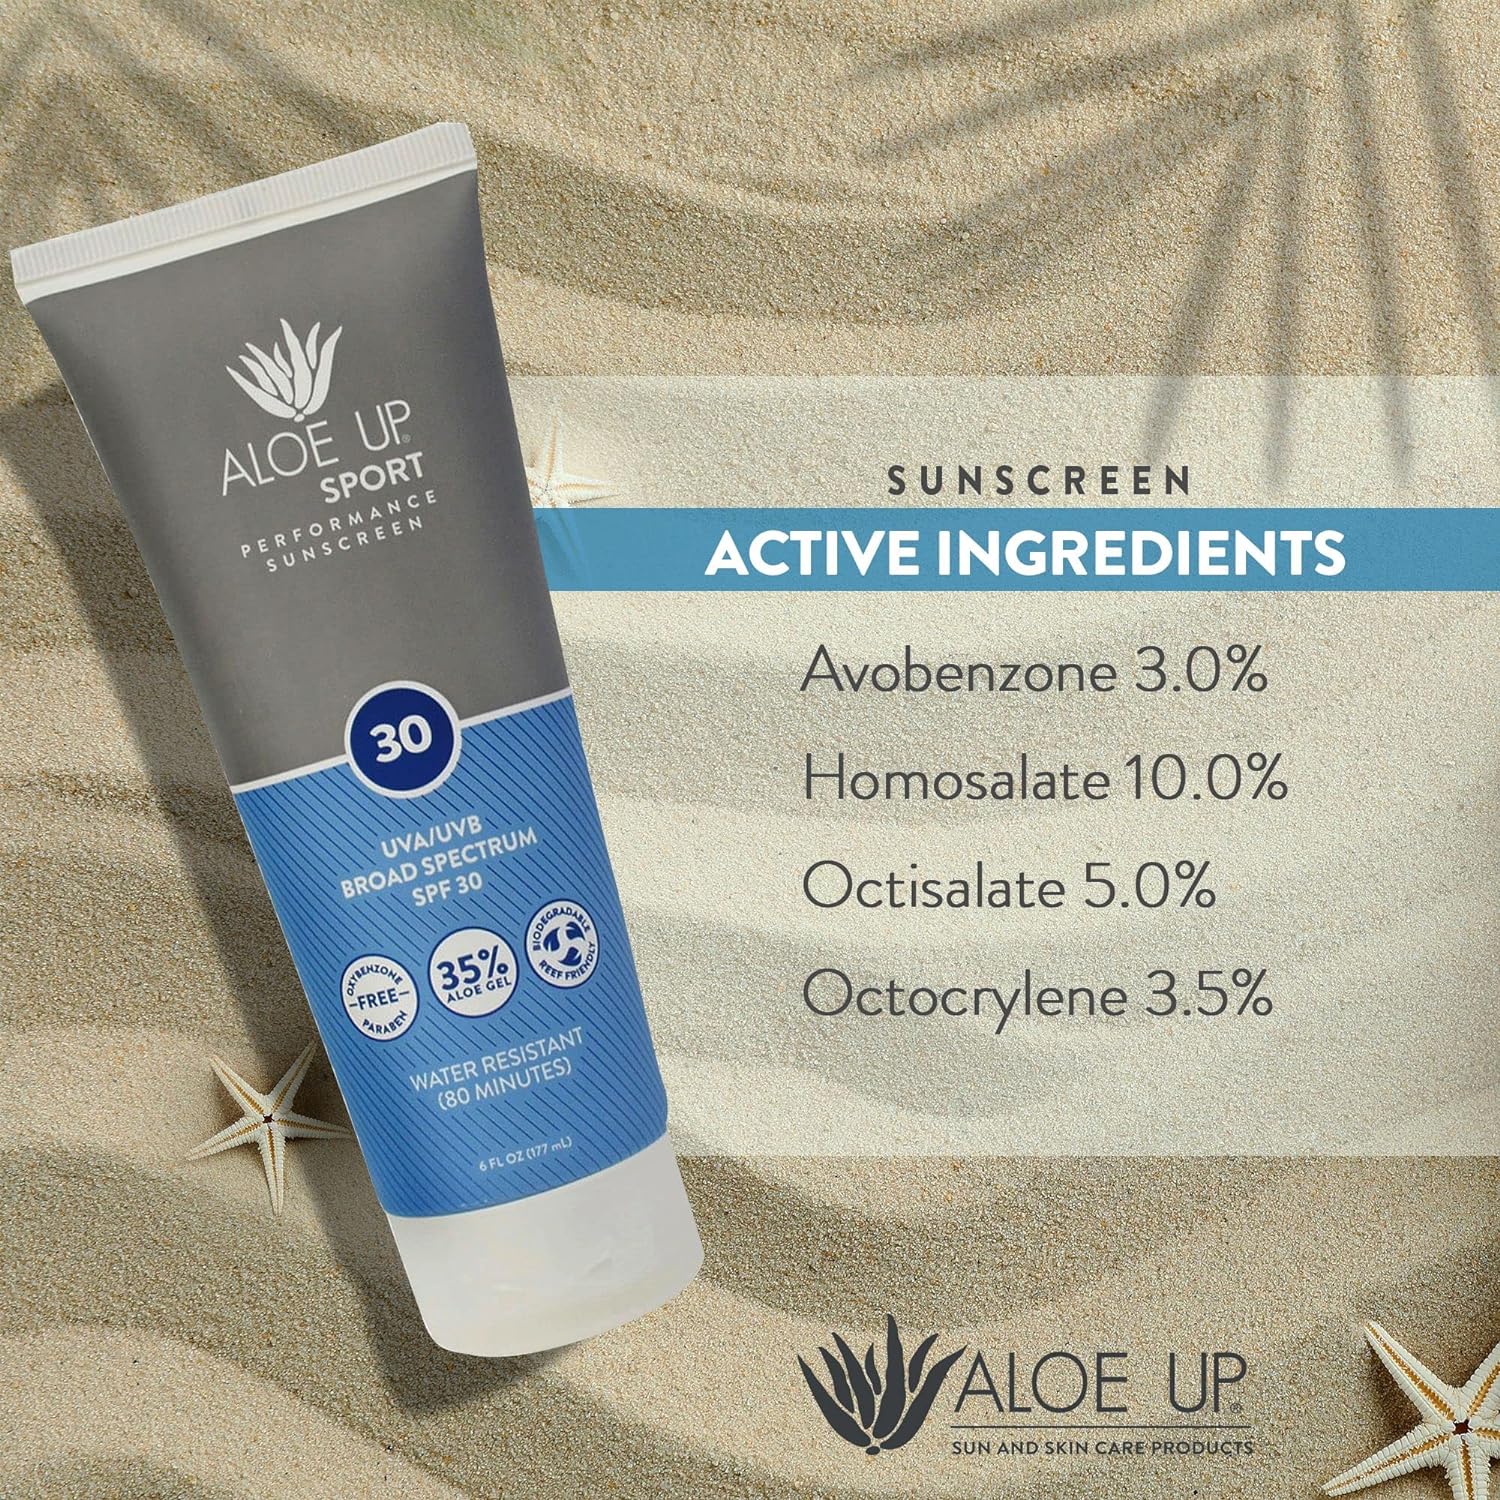 Aloe Up SPF 30 Sport Sunscreen Lotion - Broad Spectrum UVA/UVB High SPF Sunscreen, reef friendly Sunscreen for Body & Face - Waterproof Vacation Sunscreen, Aloe Gel Infused Sunblock Protection - 6 Oz : Beauty & Personal Care